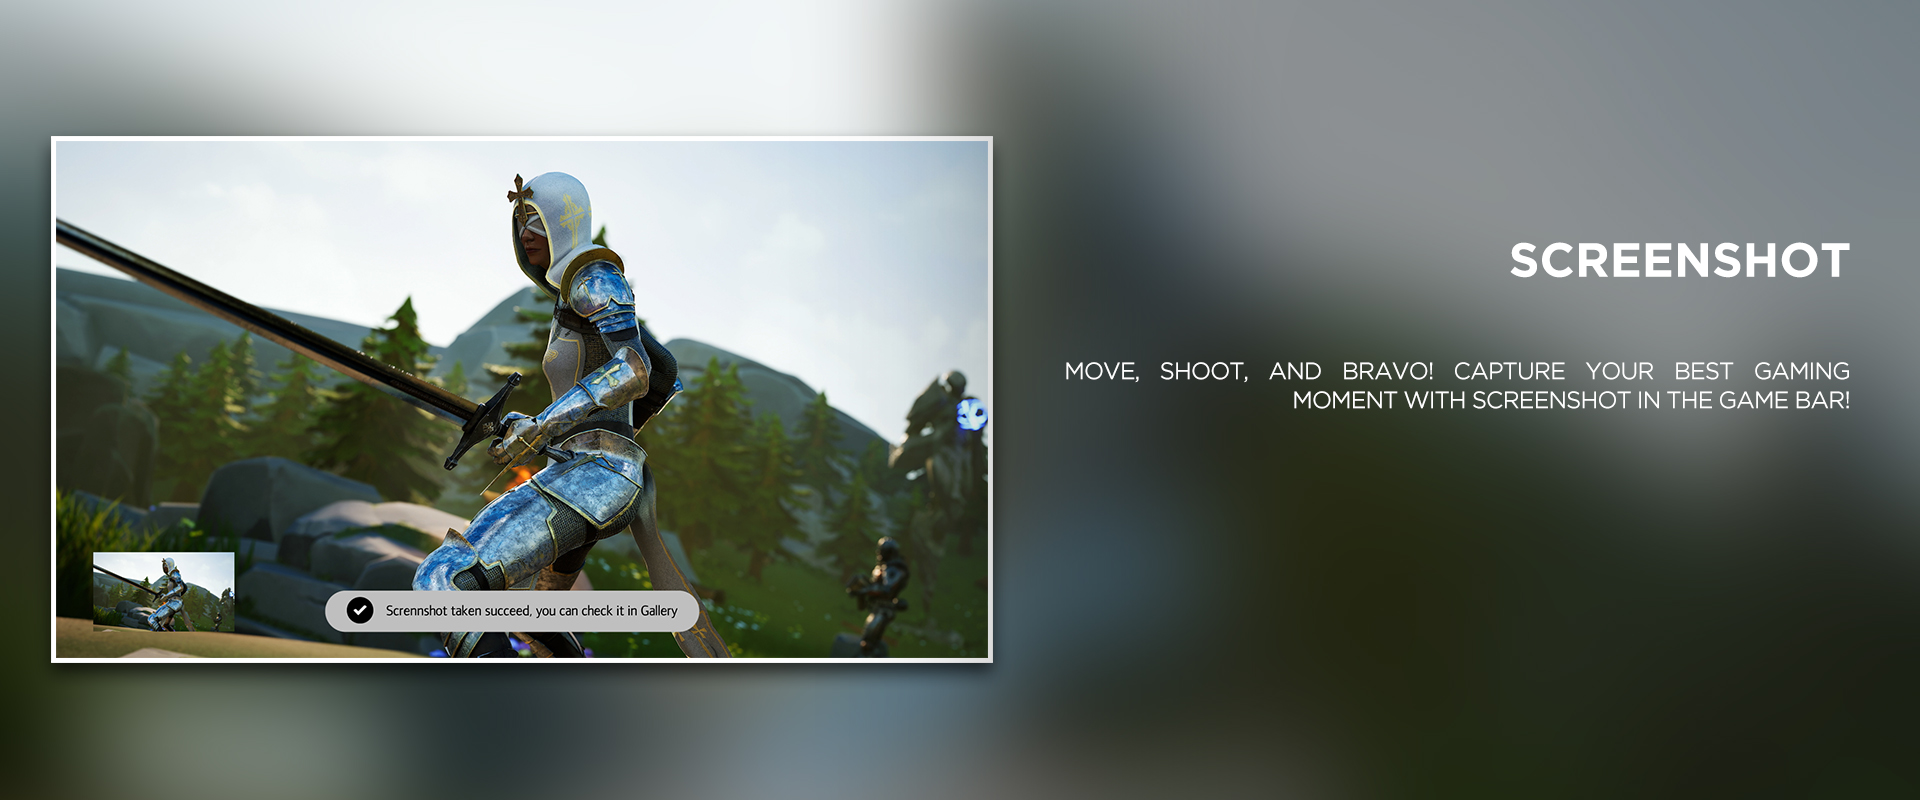 SCREENSHOT - Move, shoot, and bravo! Capture your best gaming moment with Screenshot in the Game Bar!